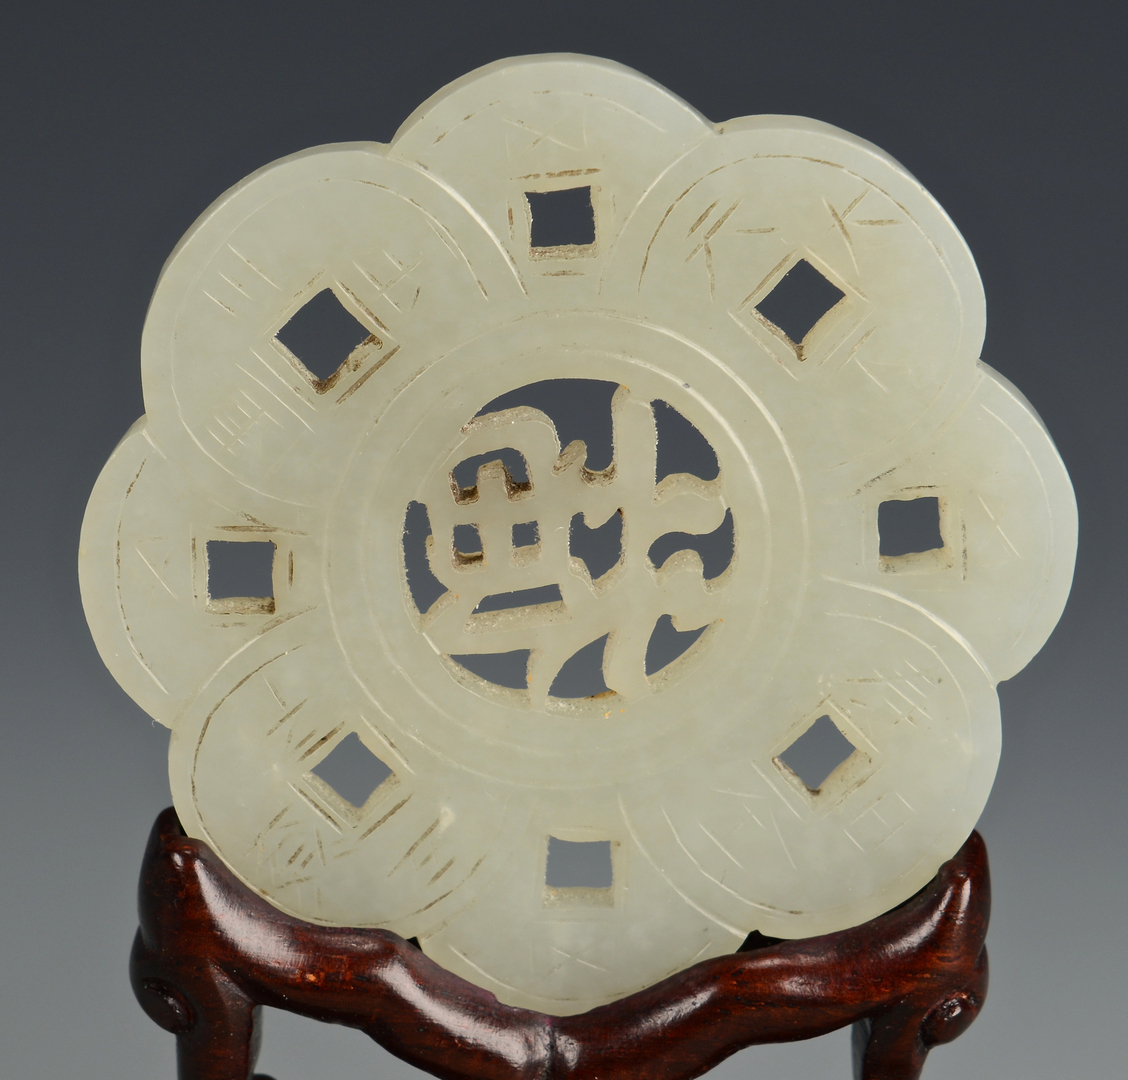 Lot 20: Carved White Jade Disc and Stand